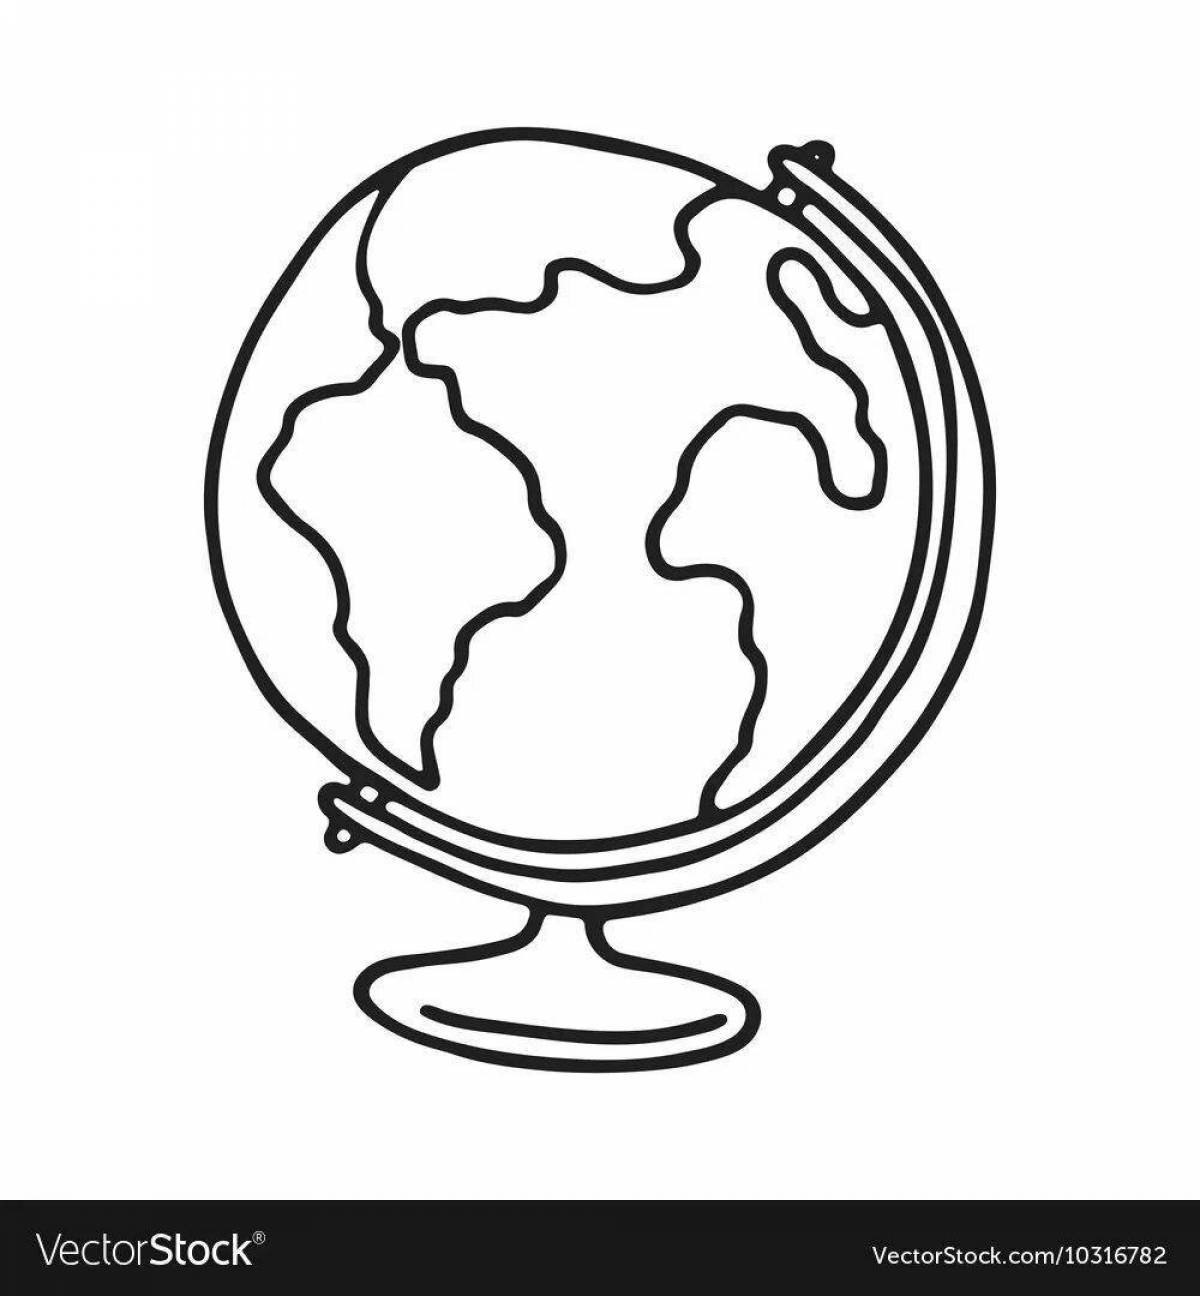 Globe drawing for kids for #1